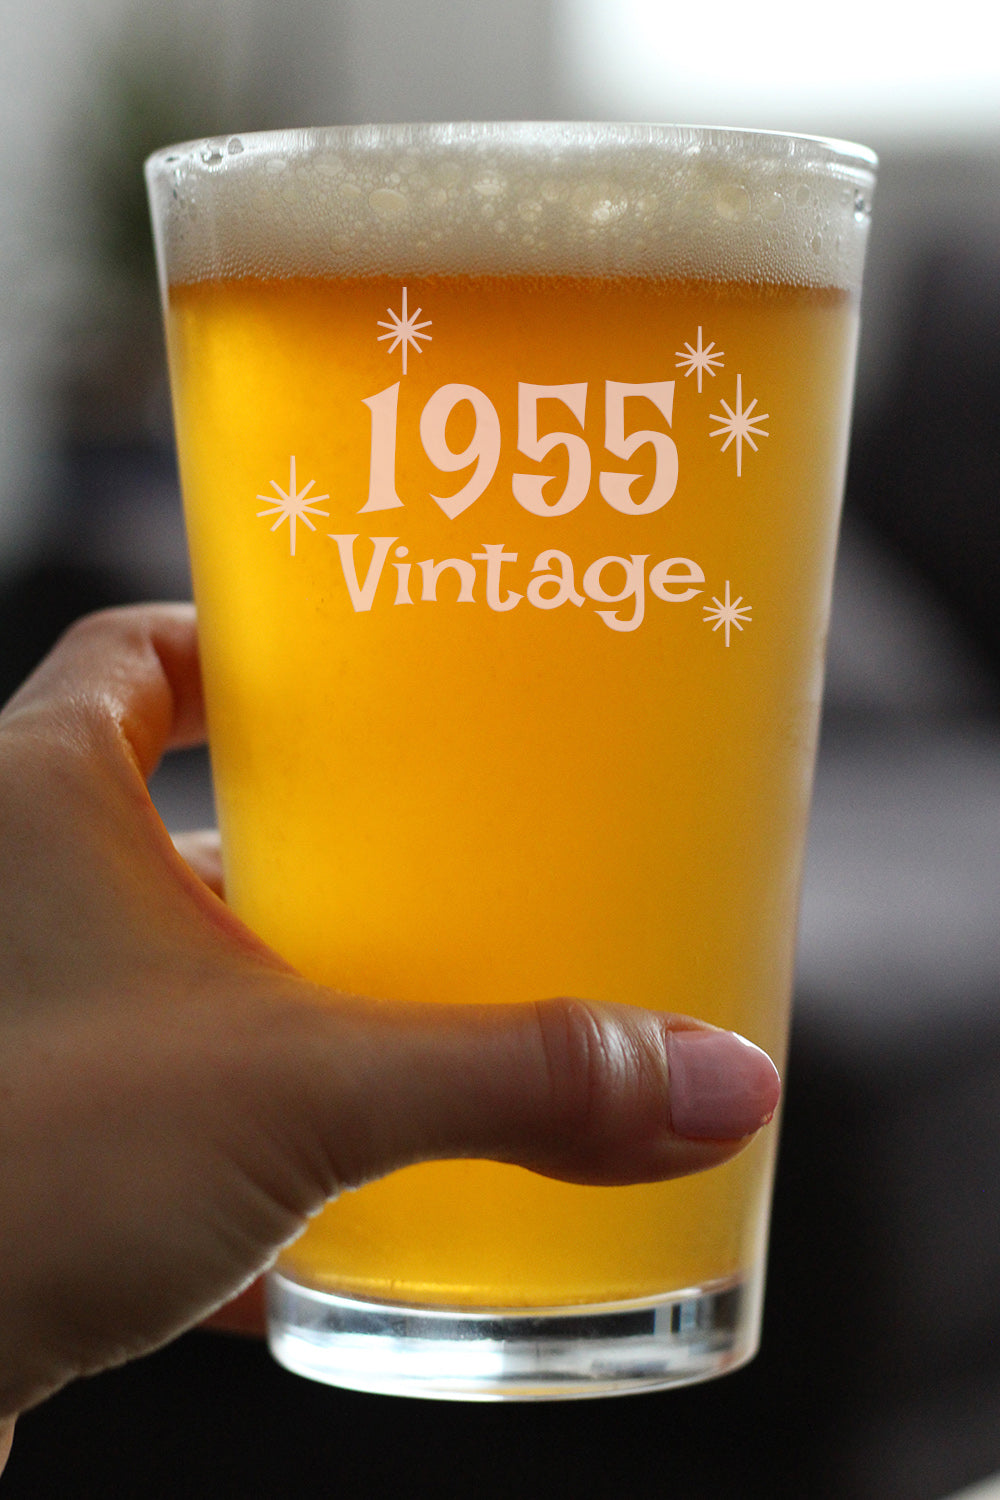 Vintage 1955 - Pint Glass for Beer - 69th Birthday Gifts for Men or Women Turning 69 - Fun Bday Party Decor - 16 oz